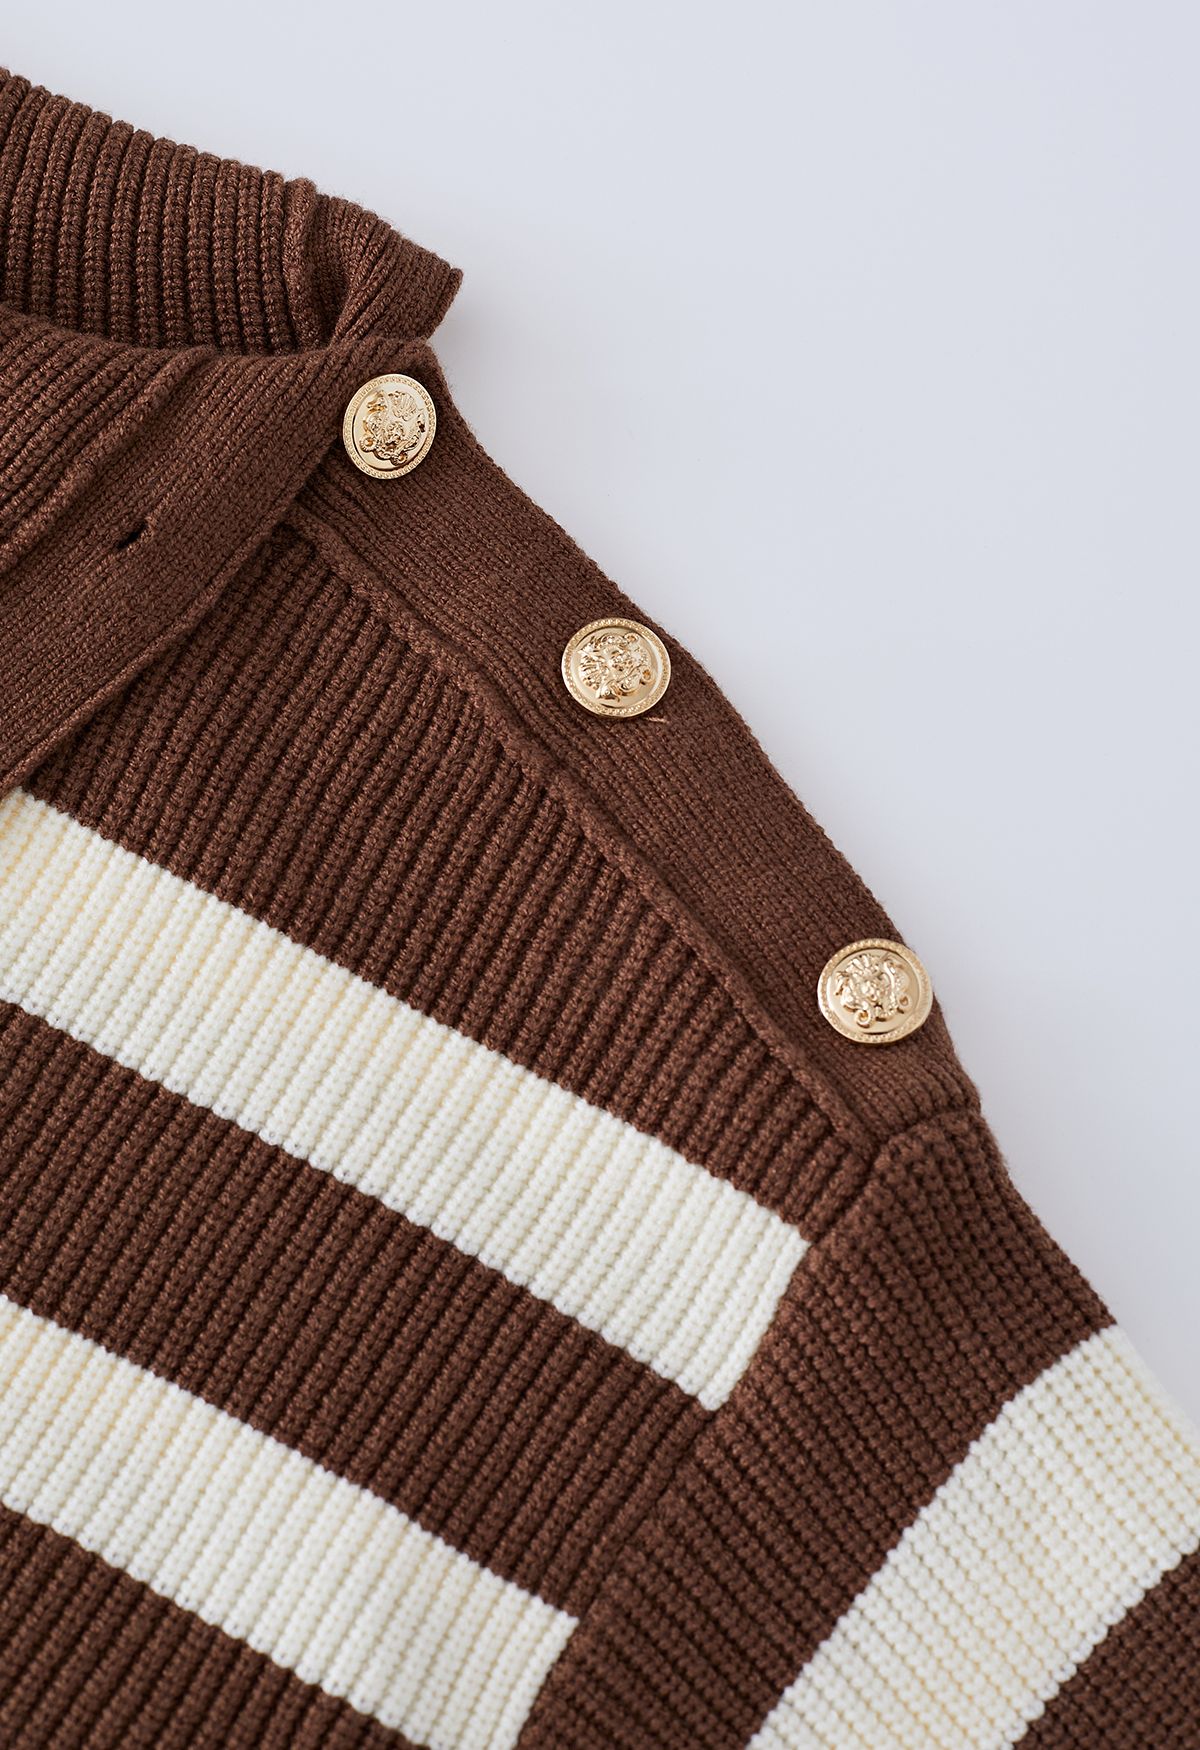 Buttoned Neck Striped Oversize Sweater in Brown